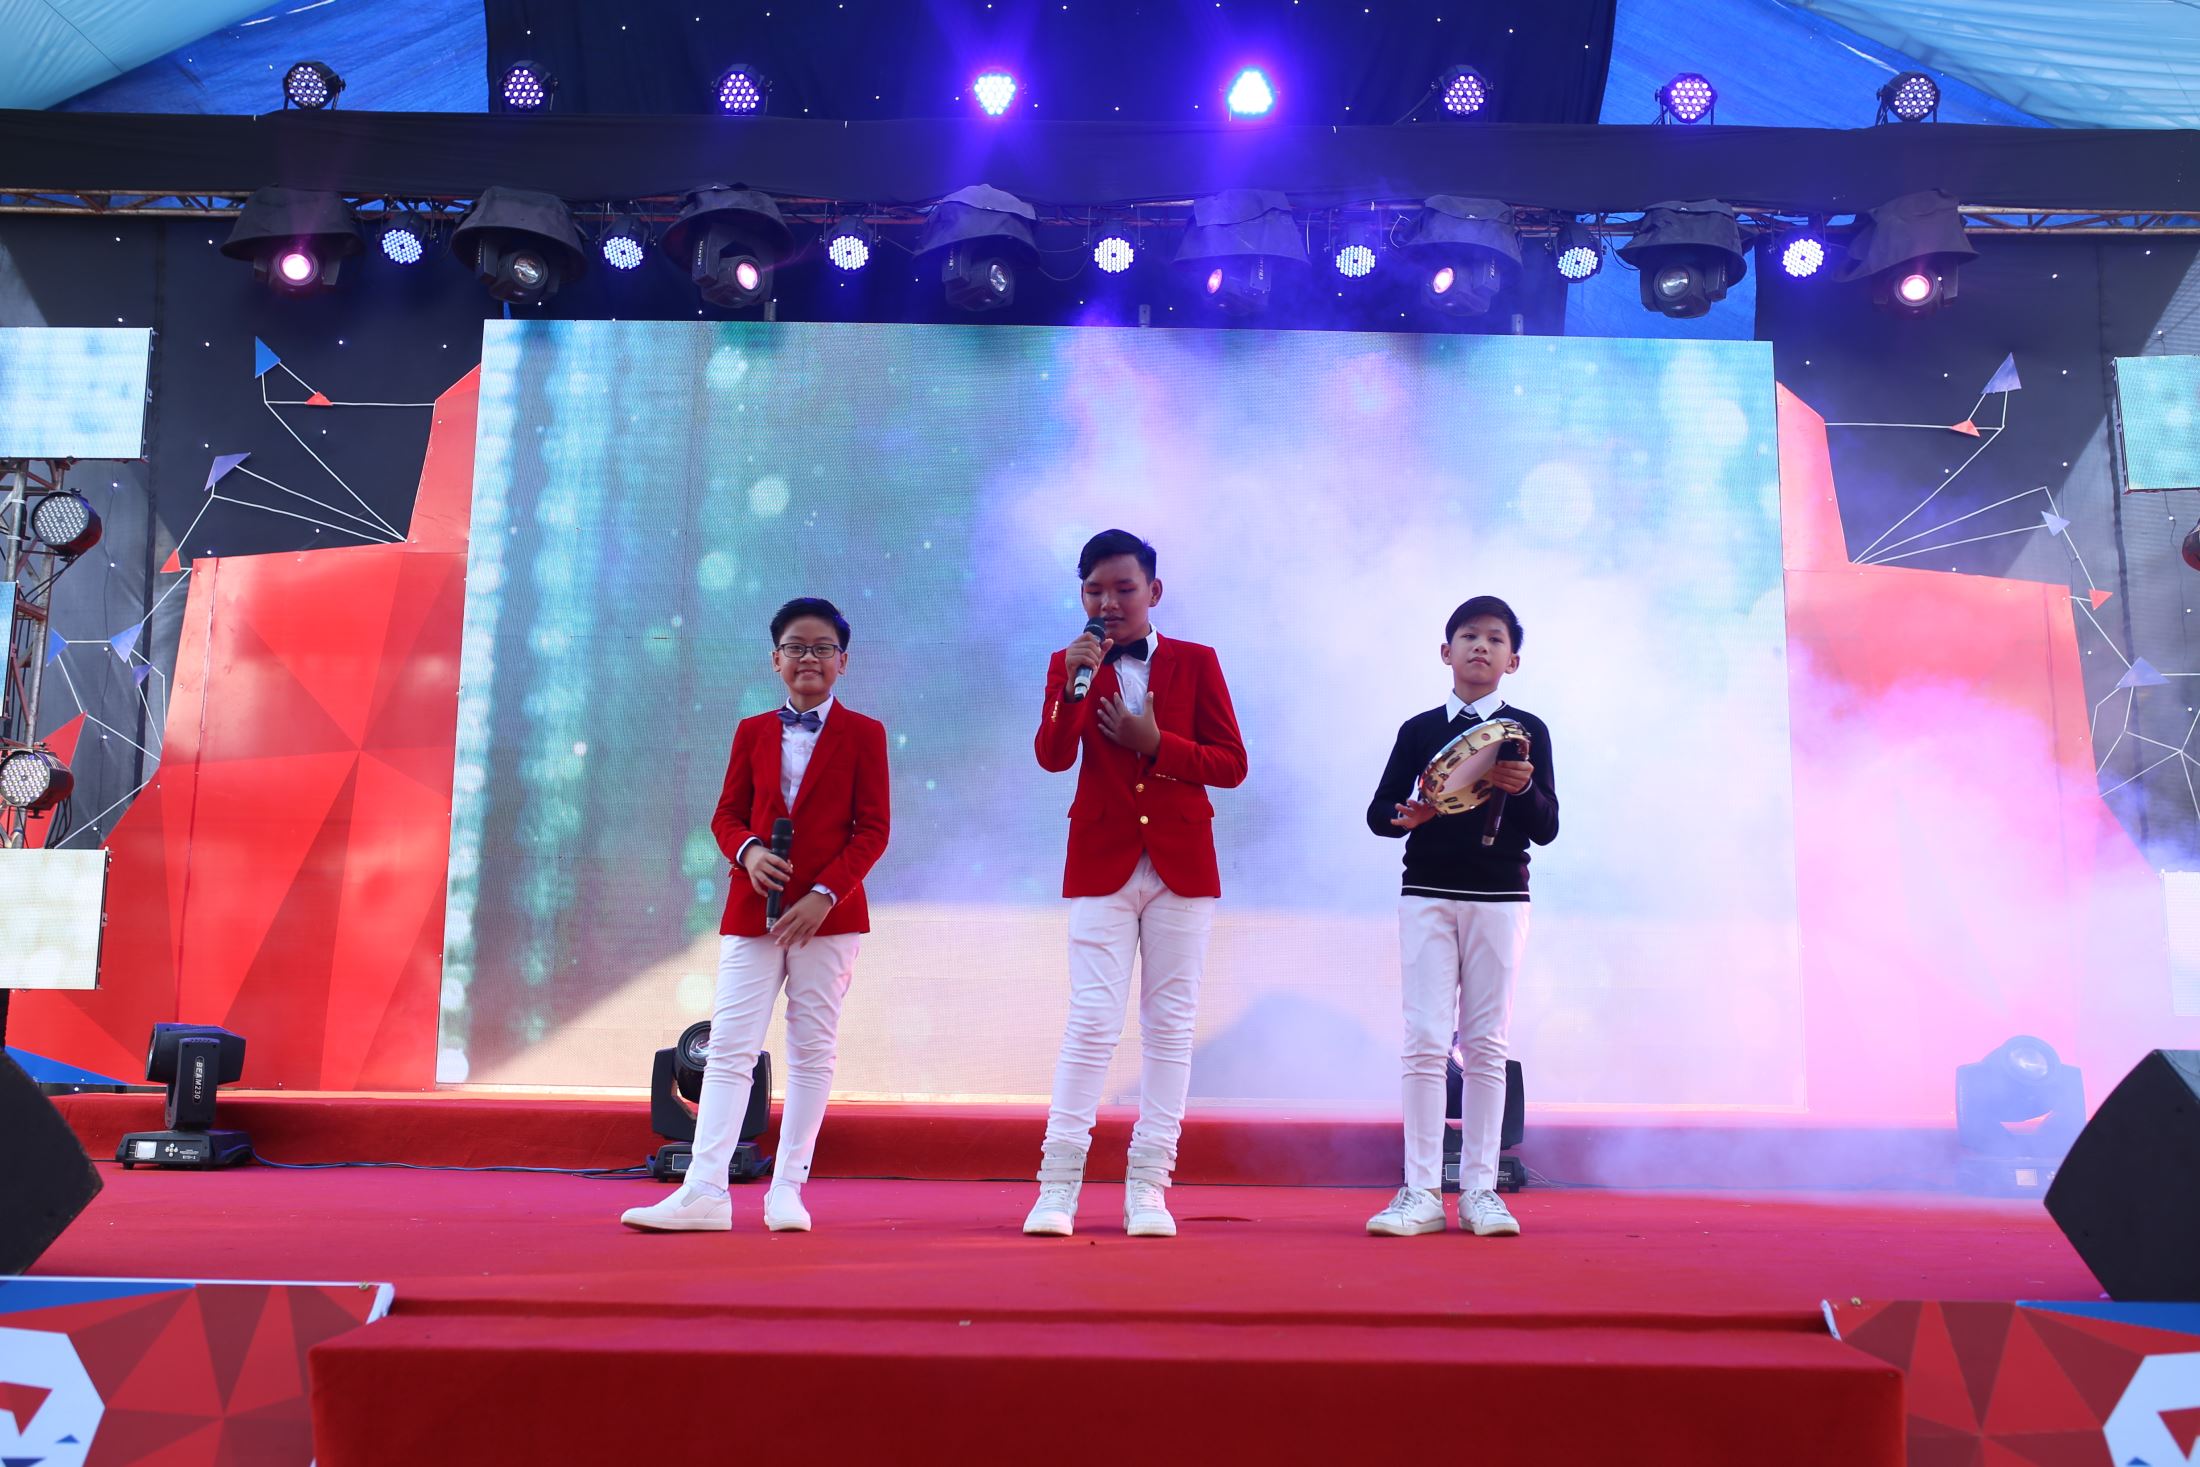 The trio Tan Ban – Nhat Duy – Hieu Trung (students of SNA and iSchool) at the event